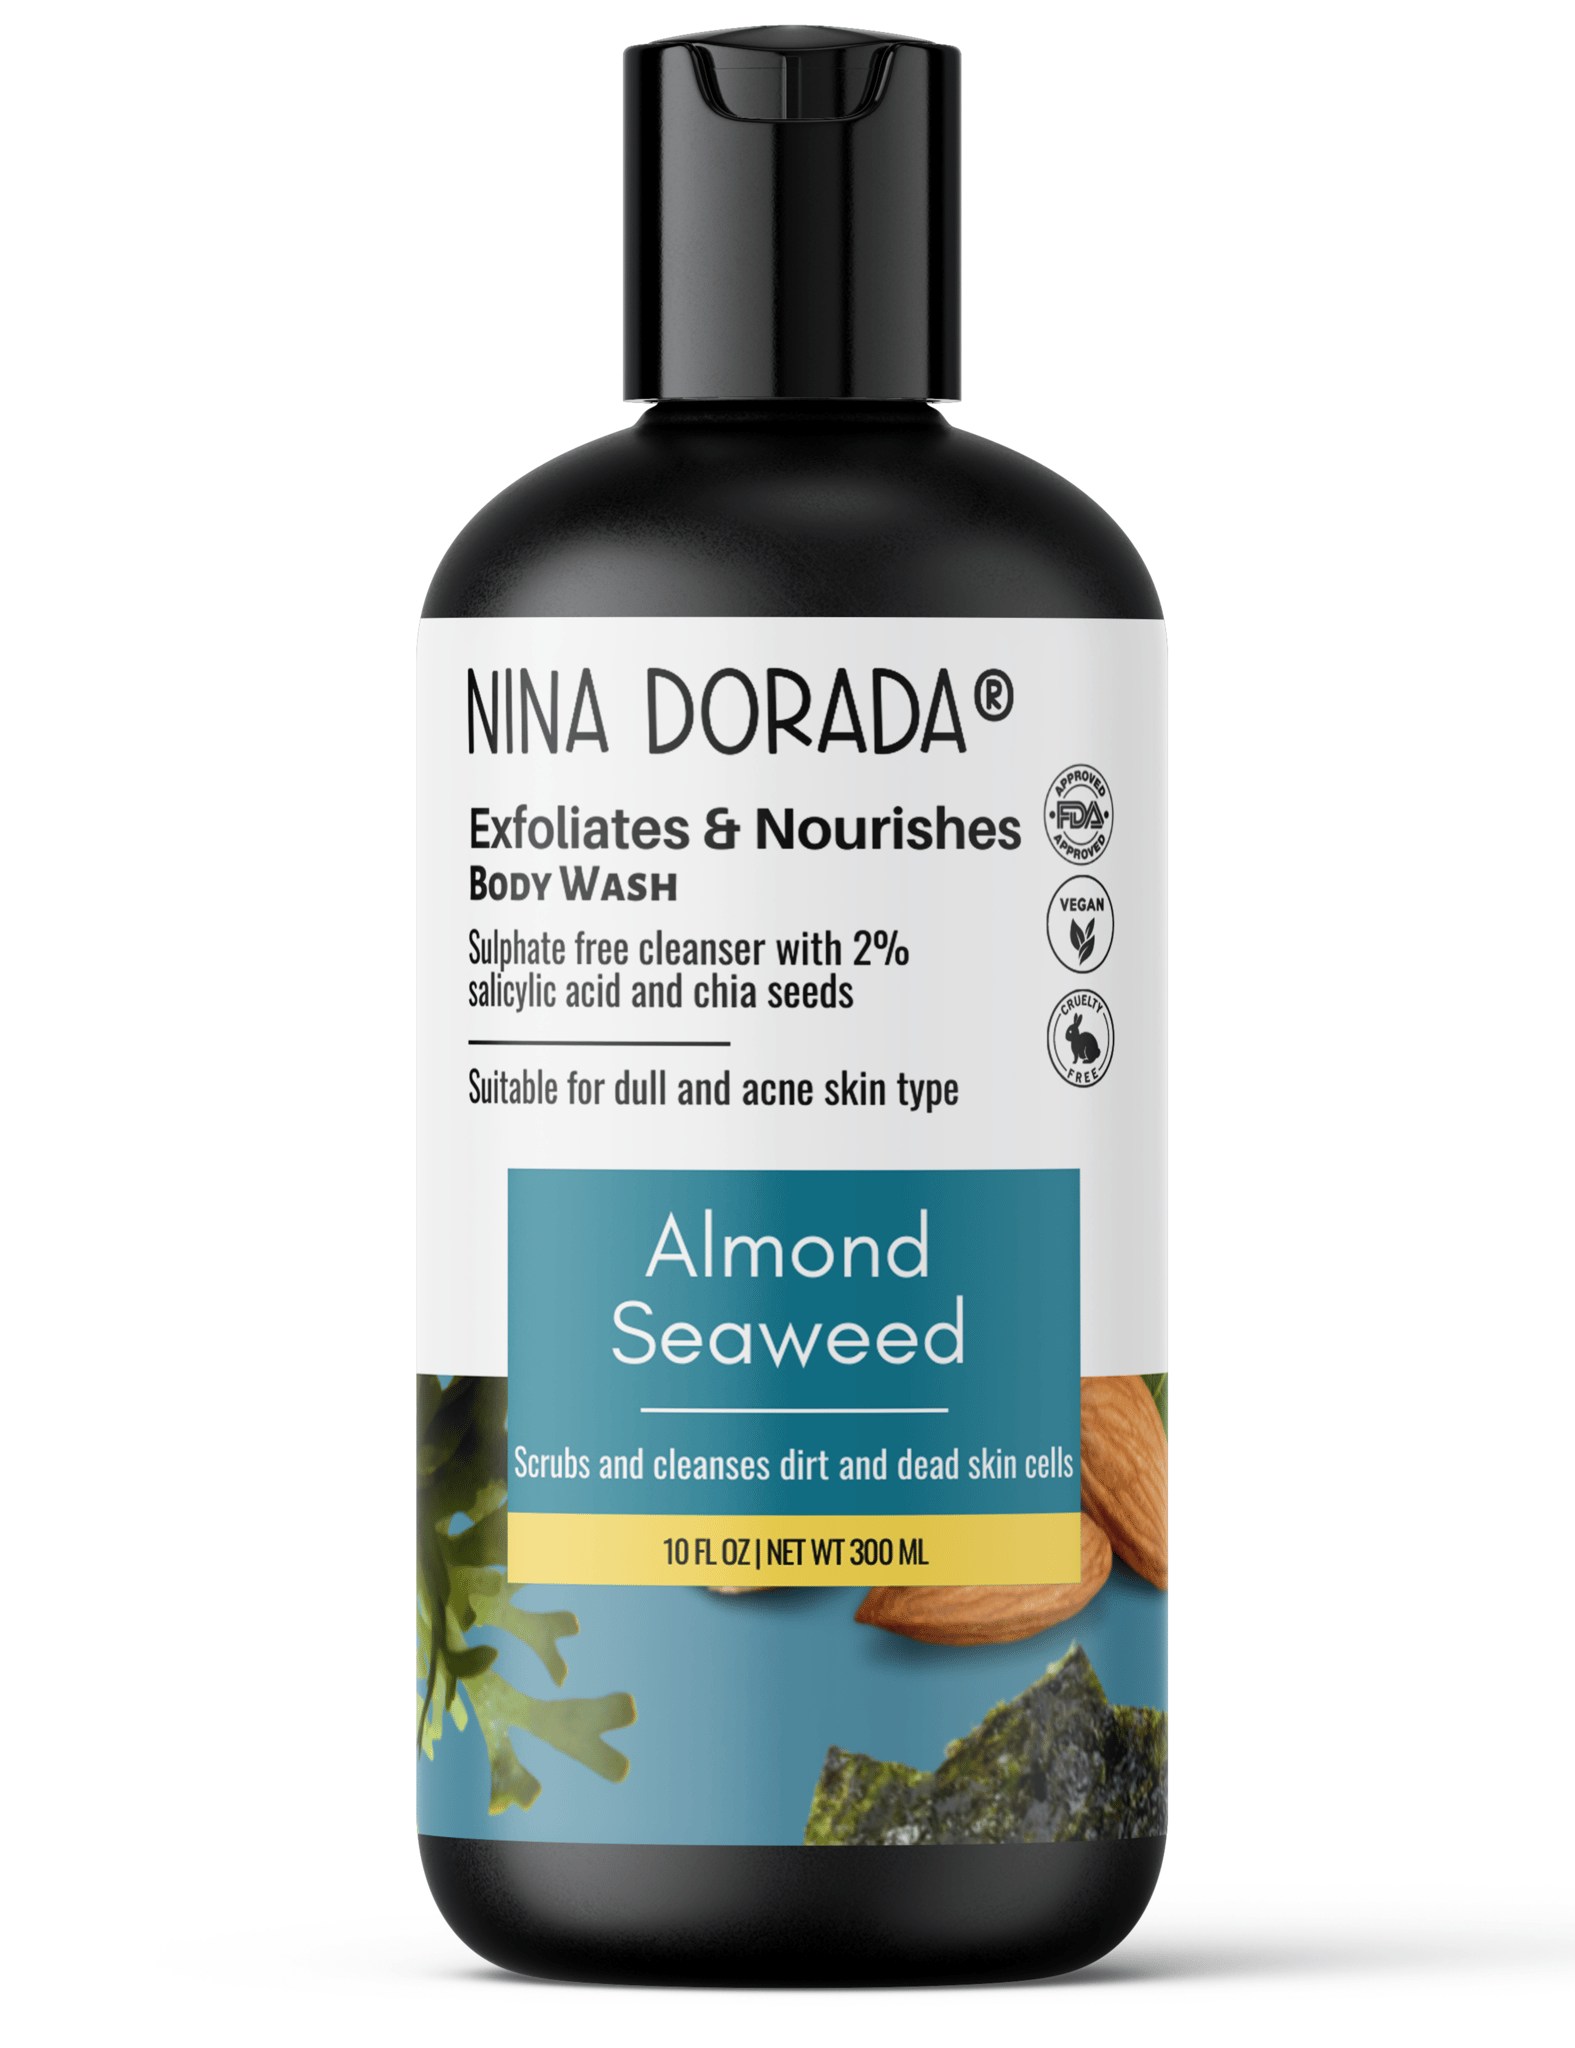 Nina Dorada Anti Acne 2% Salicylic Body Wash with Almond and Seaweed | With Chia Seeds for Exfoliation | Hydrating and Refreshing Shower Gel | Sulphate Free | 300ml…